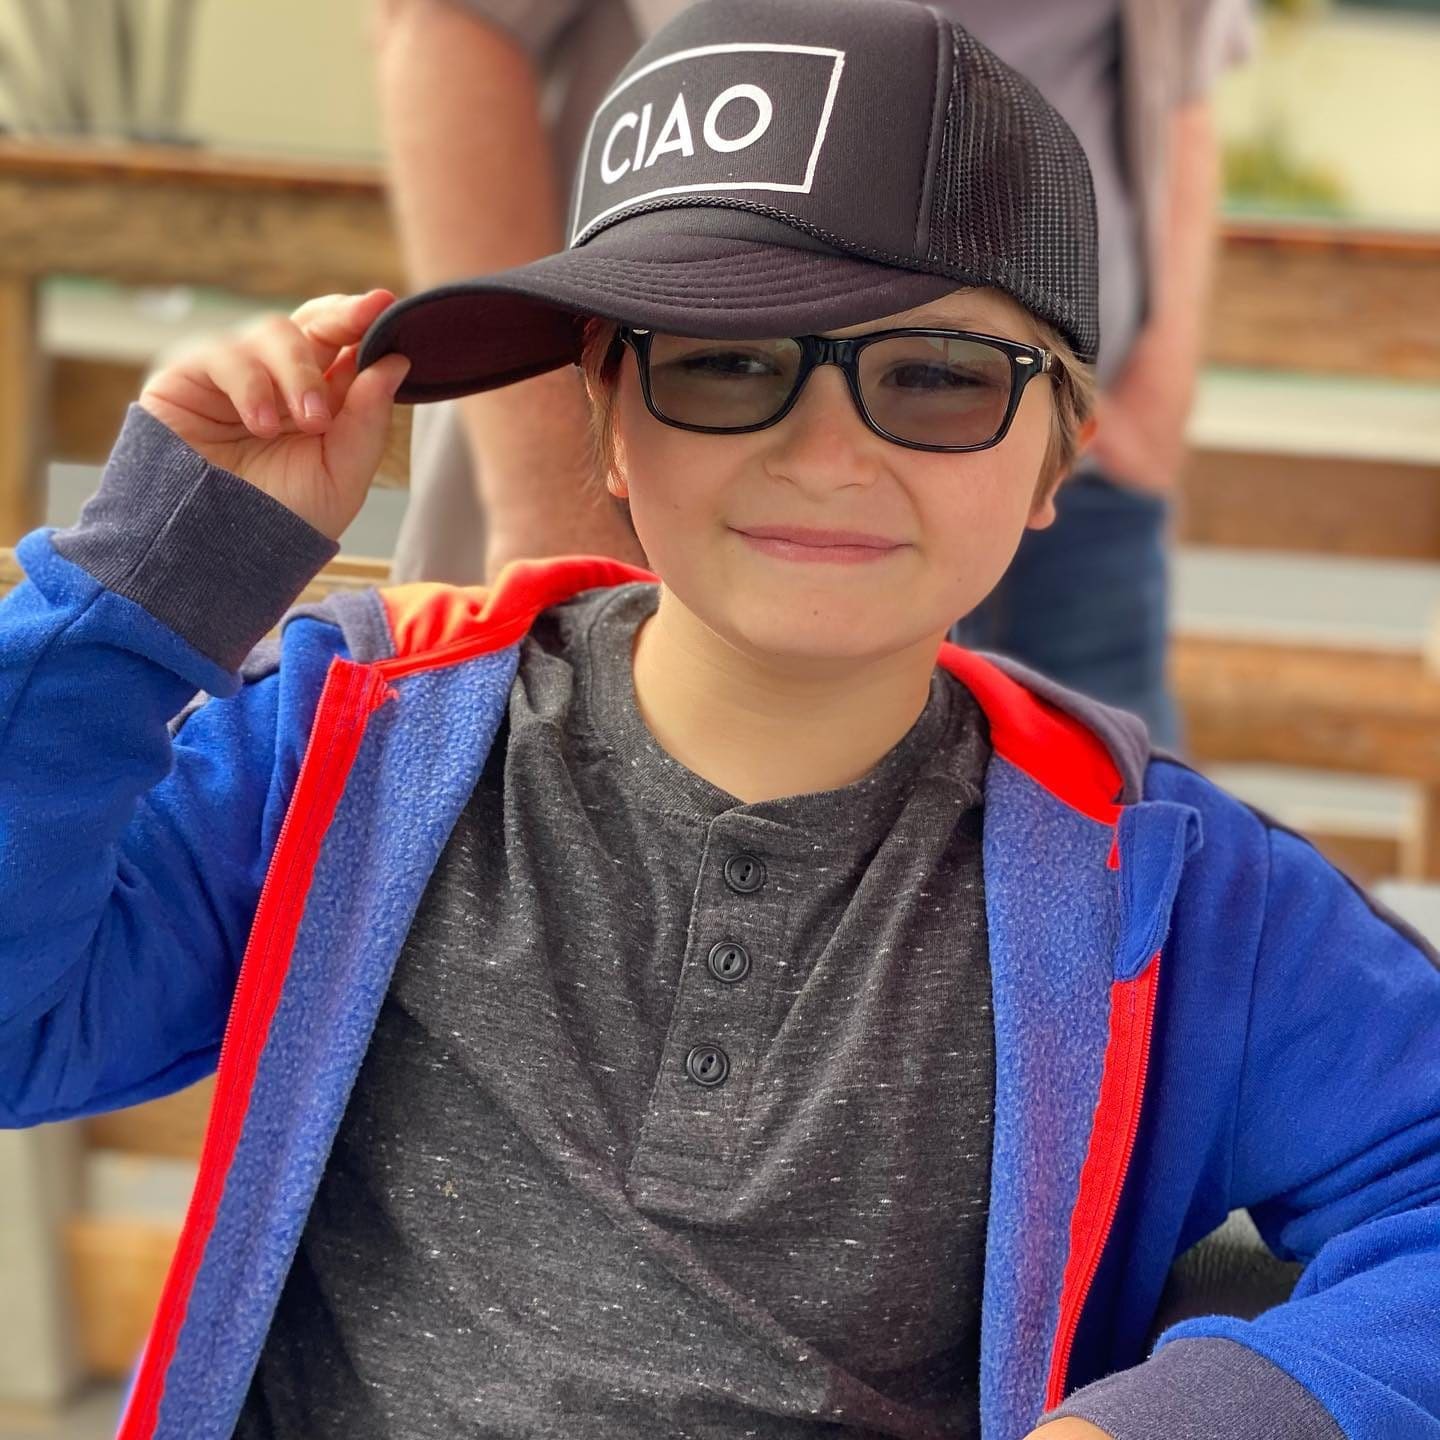 Ryder Allen Wiki, Age, Parents, Education, Family & More 11